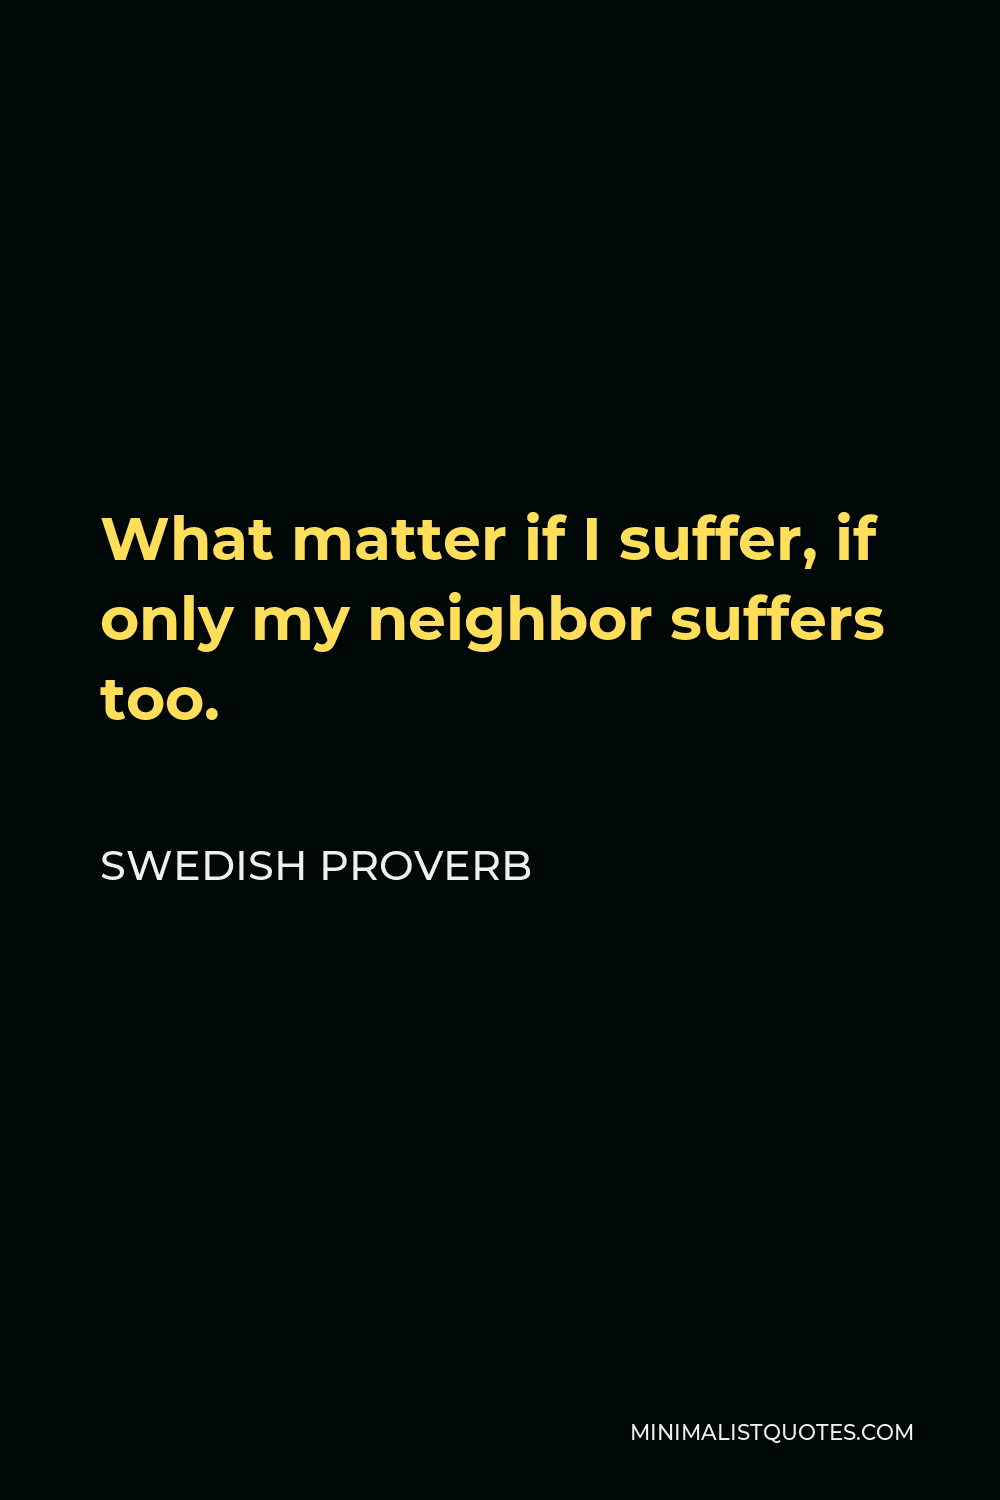 Swedish Proverb Quote - What matter if I suffer, if only my neighbor suffers too.